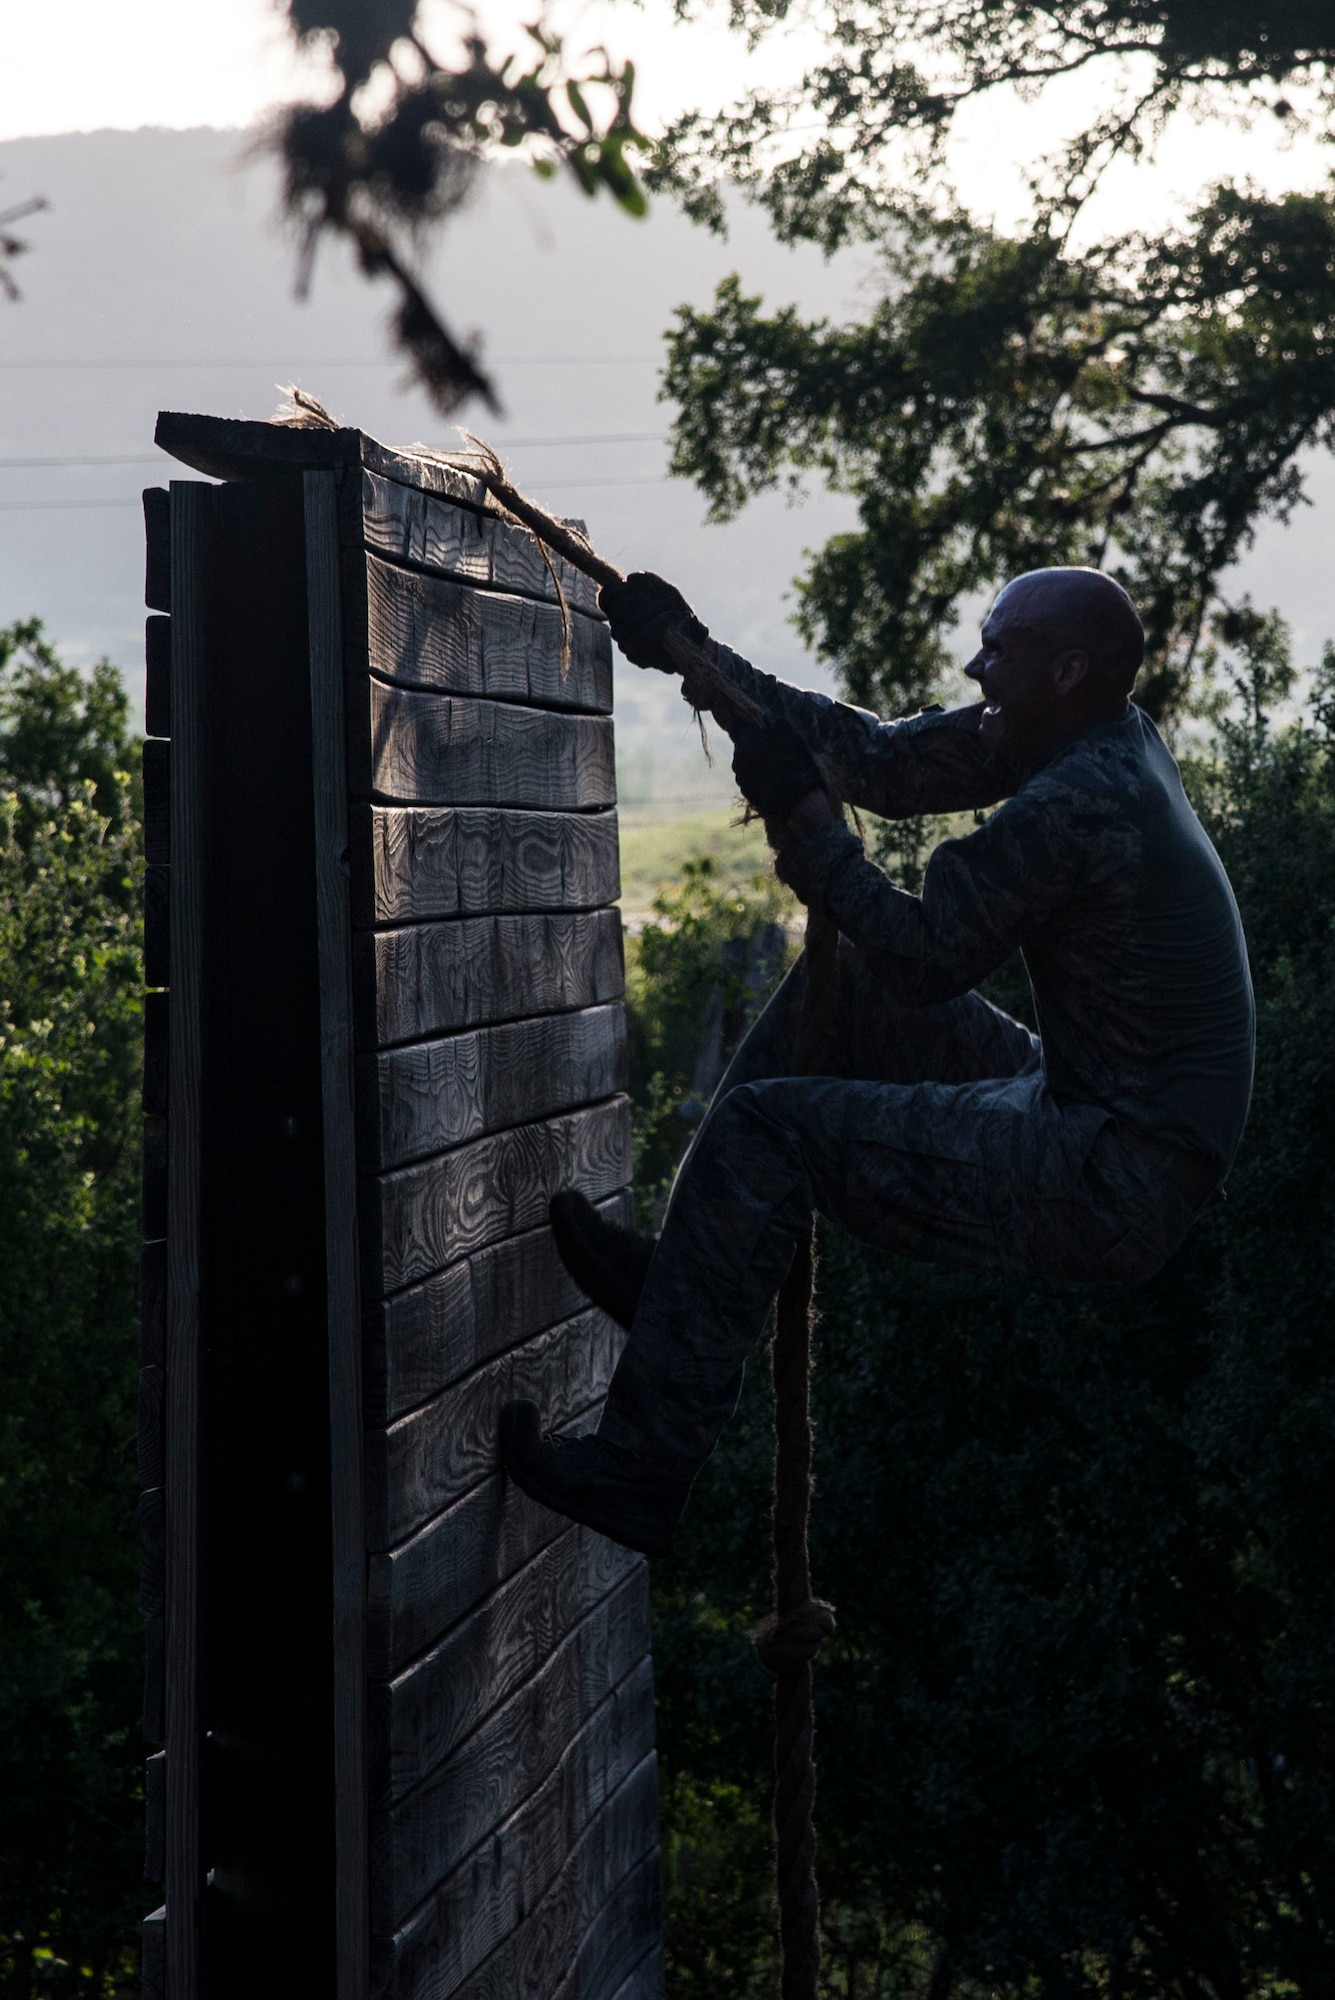 Capt. Nathan Spradley, 902nd Security Forces Squadron operations officer, climbs an obstacle July 23, 2018, at Joint Base San Antonio-Camp Bullis, Texas in preparation for the 2018 Defender Challenge. The competition will pit security forces teams against each other in realistic weapons, dismounted operations and relay challenge events. (U.S. Air Force photo by Senior Airman Stormy Archer)